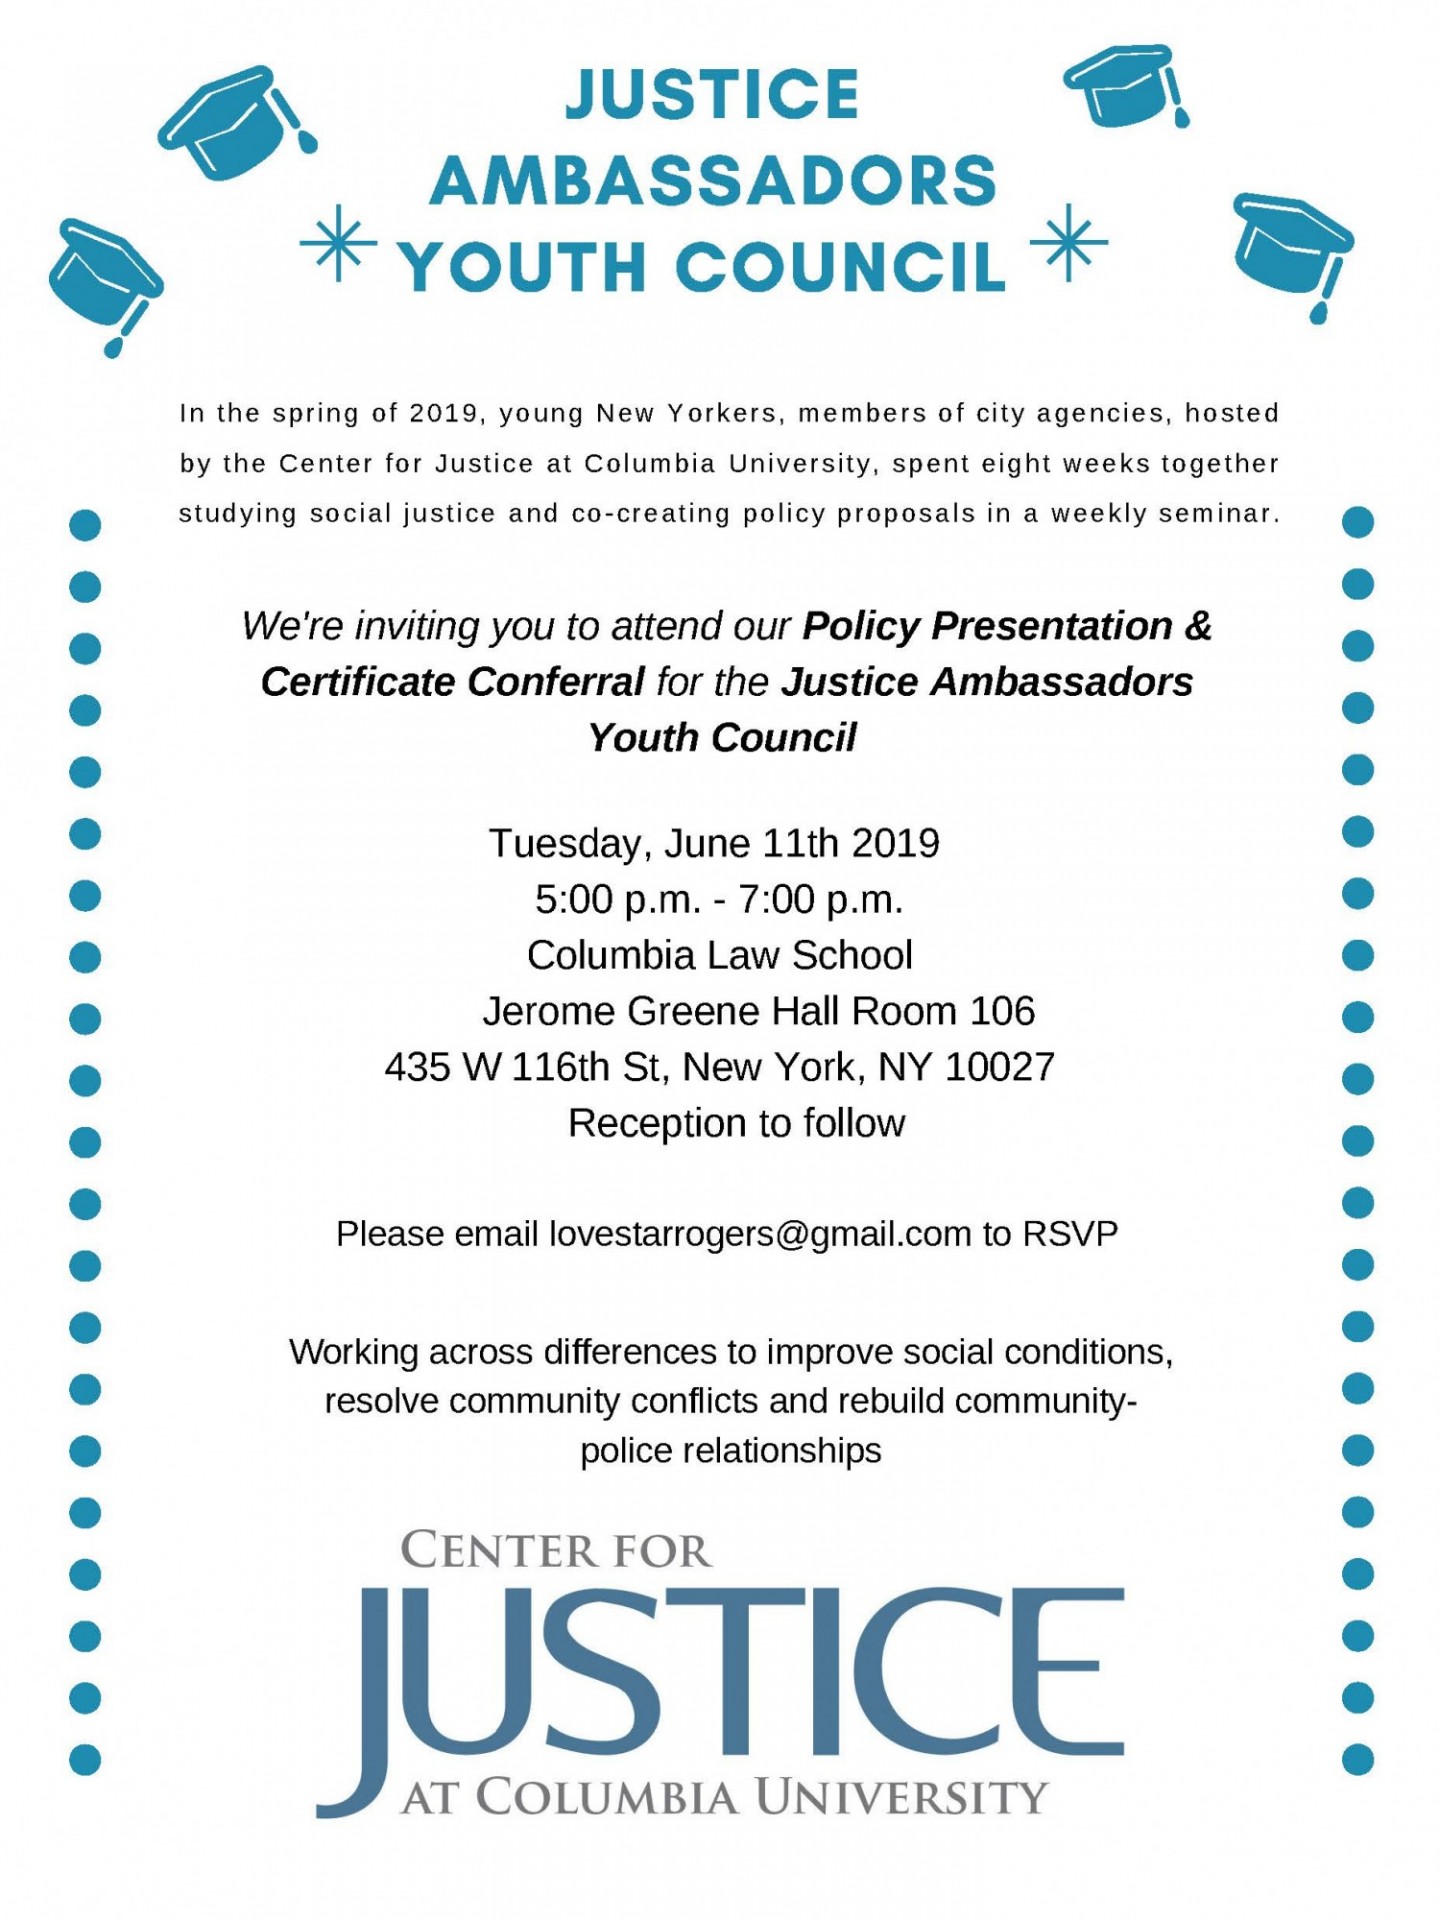 Justice Ambassadors Youth Council Policy Presentation & Certificate Conferral flyer